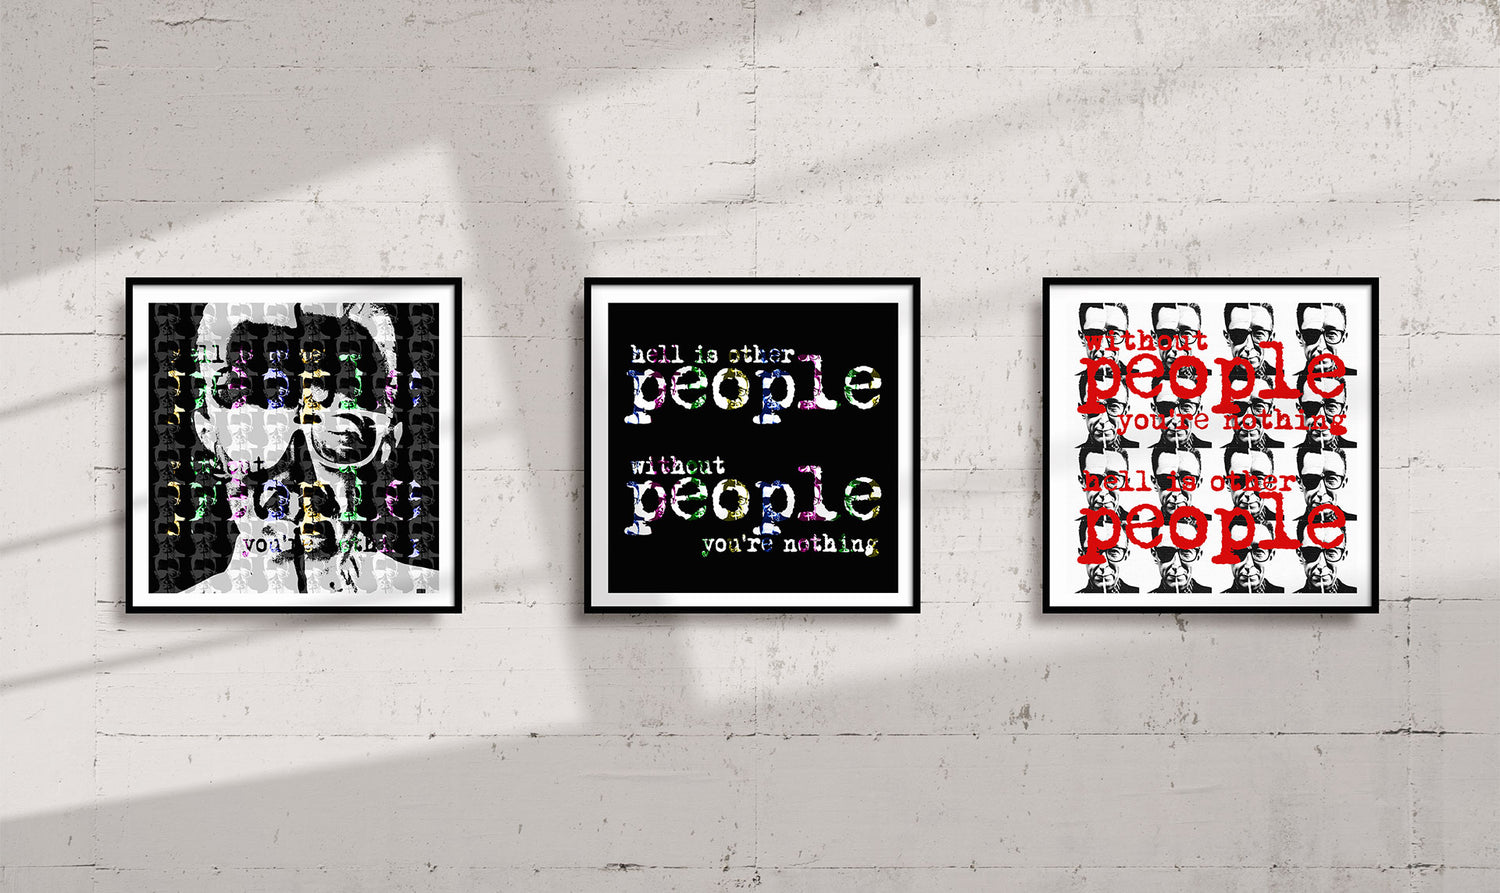 Three square framed Giclee Prints on a concrete wall